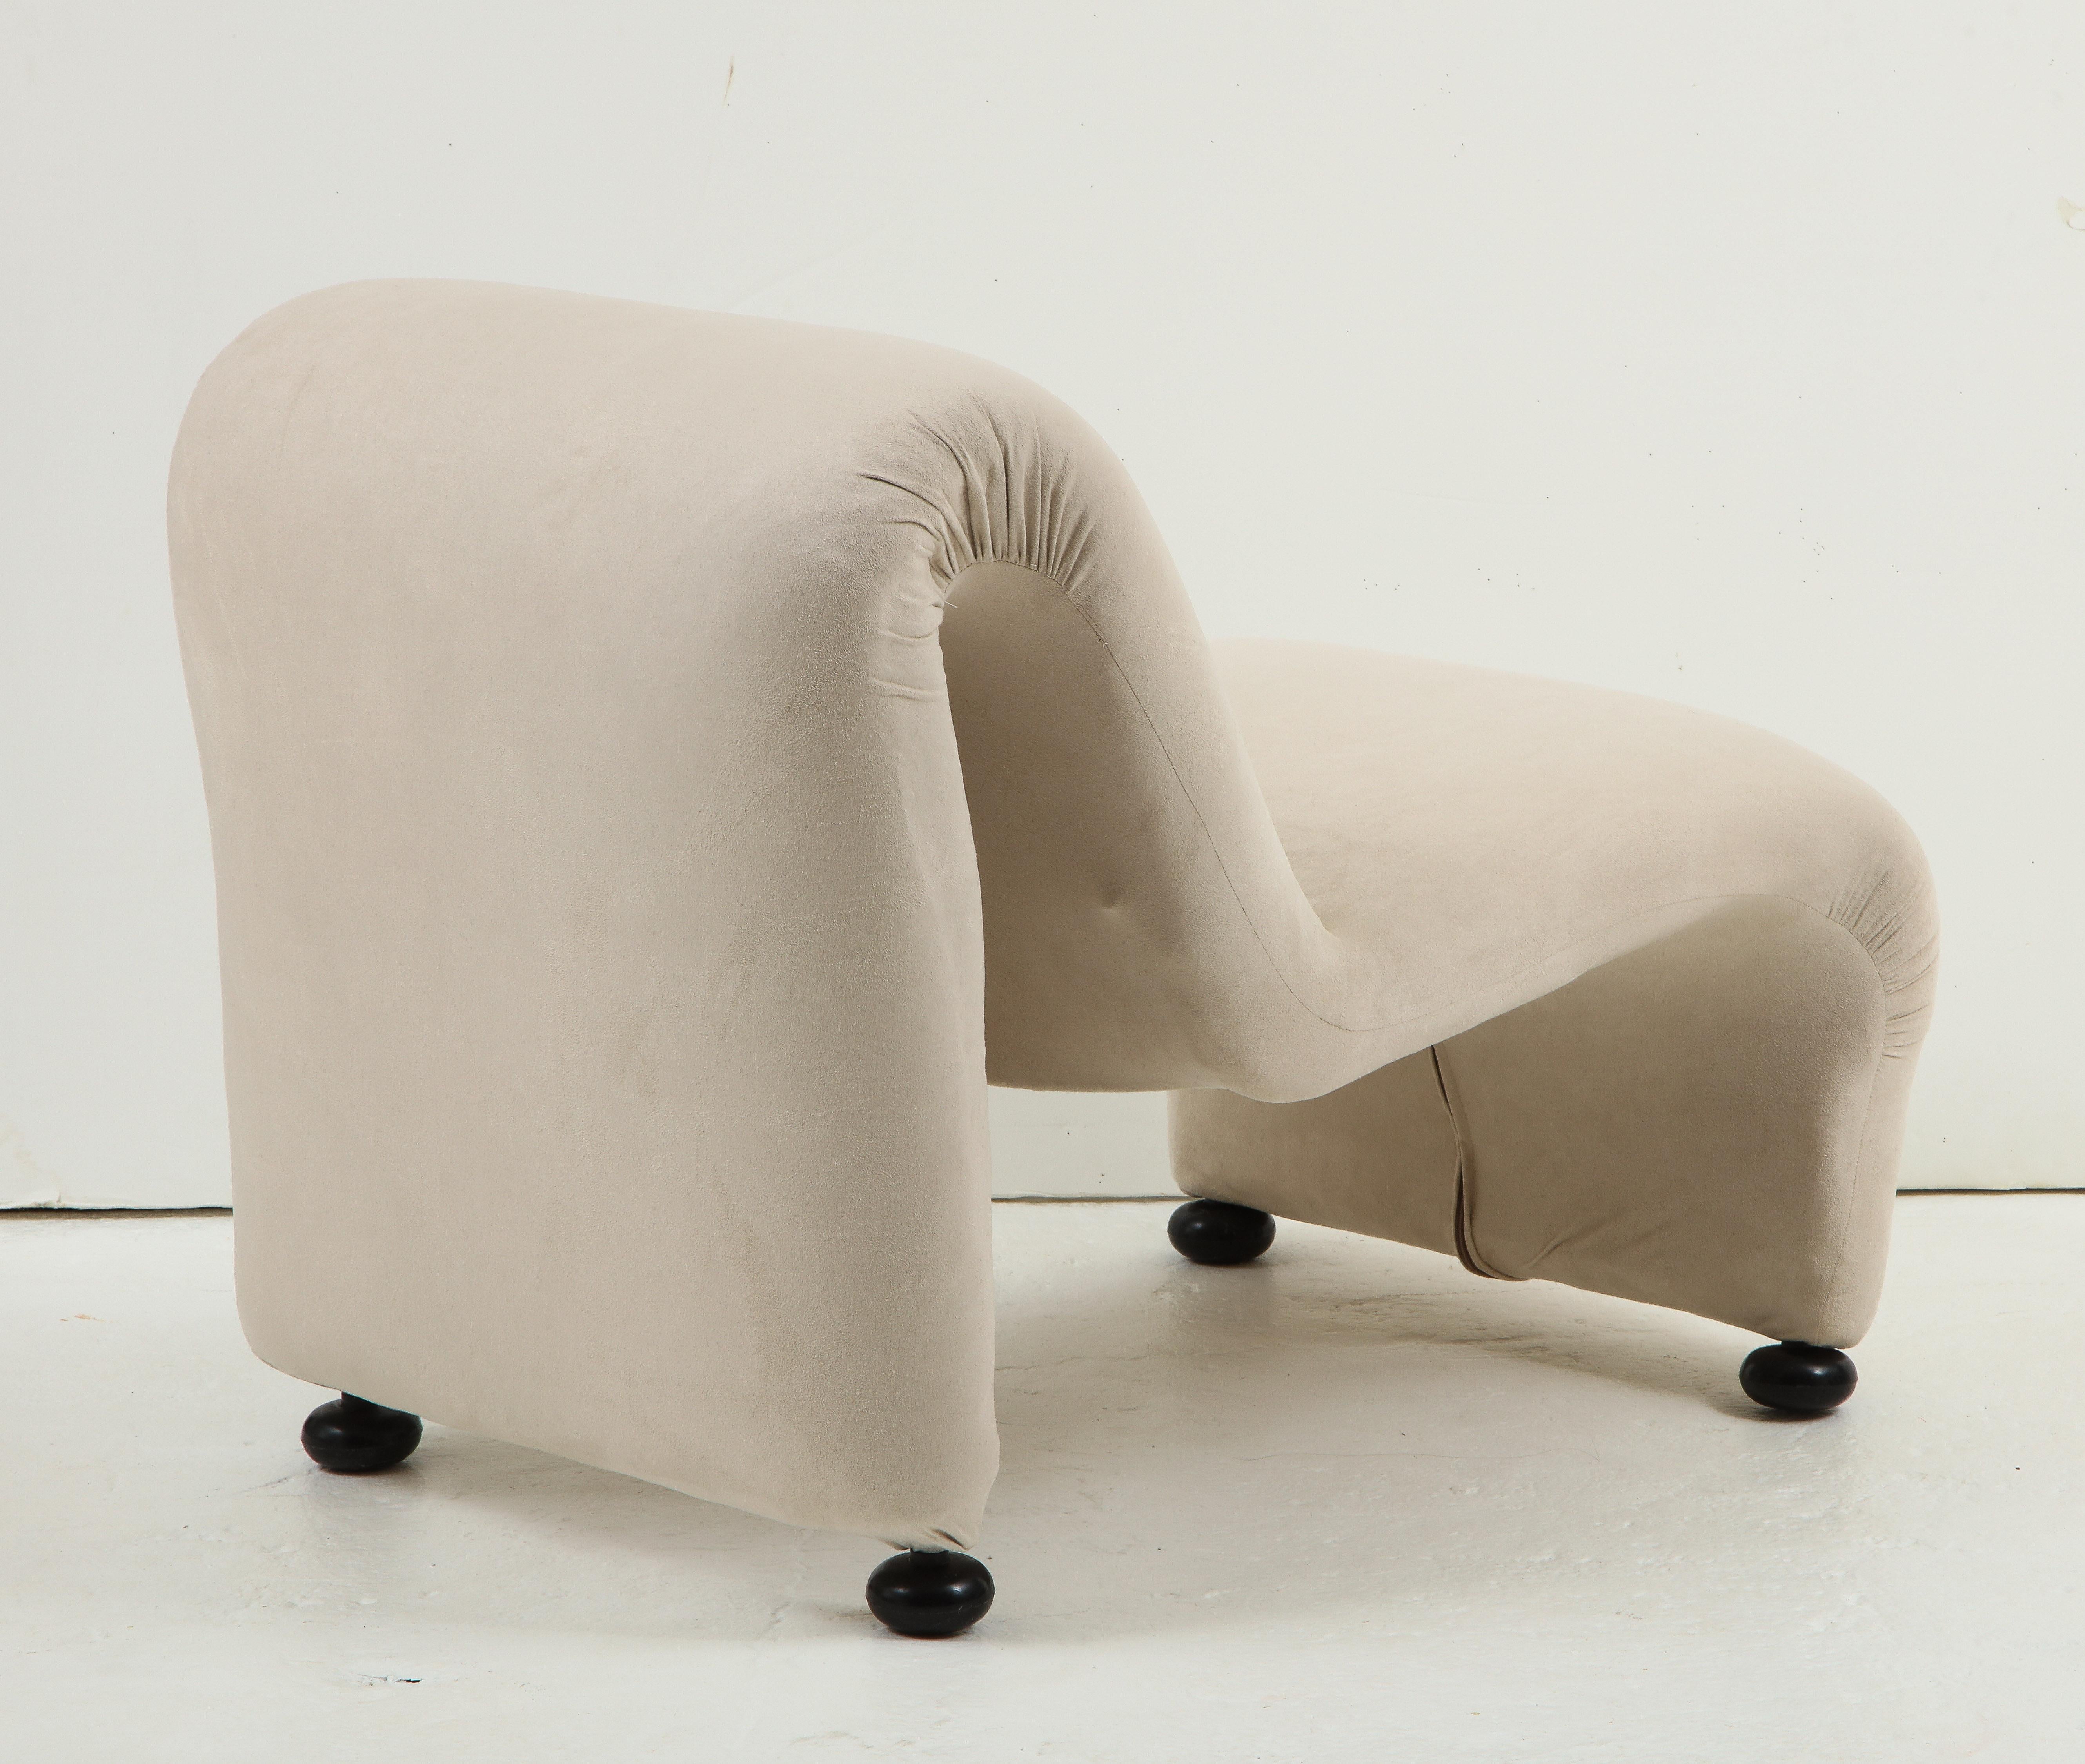 Sculptural Etienne Fermigier lounge chairs, white, 1970s, France

Amazing set of chairs, sold individually or as a set of 4. Chic in any setting. Covered in ultrasuede white fabric.

Chairs can be purchased individually.
Price is for 4 chairs.